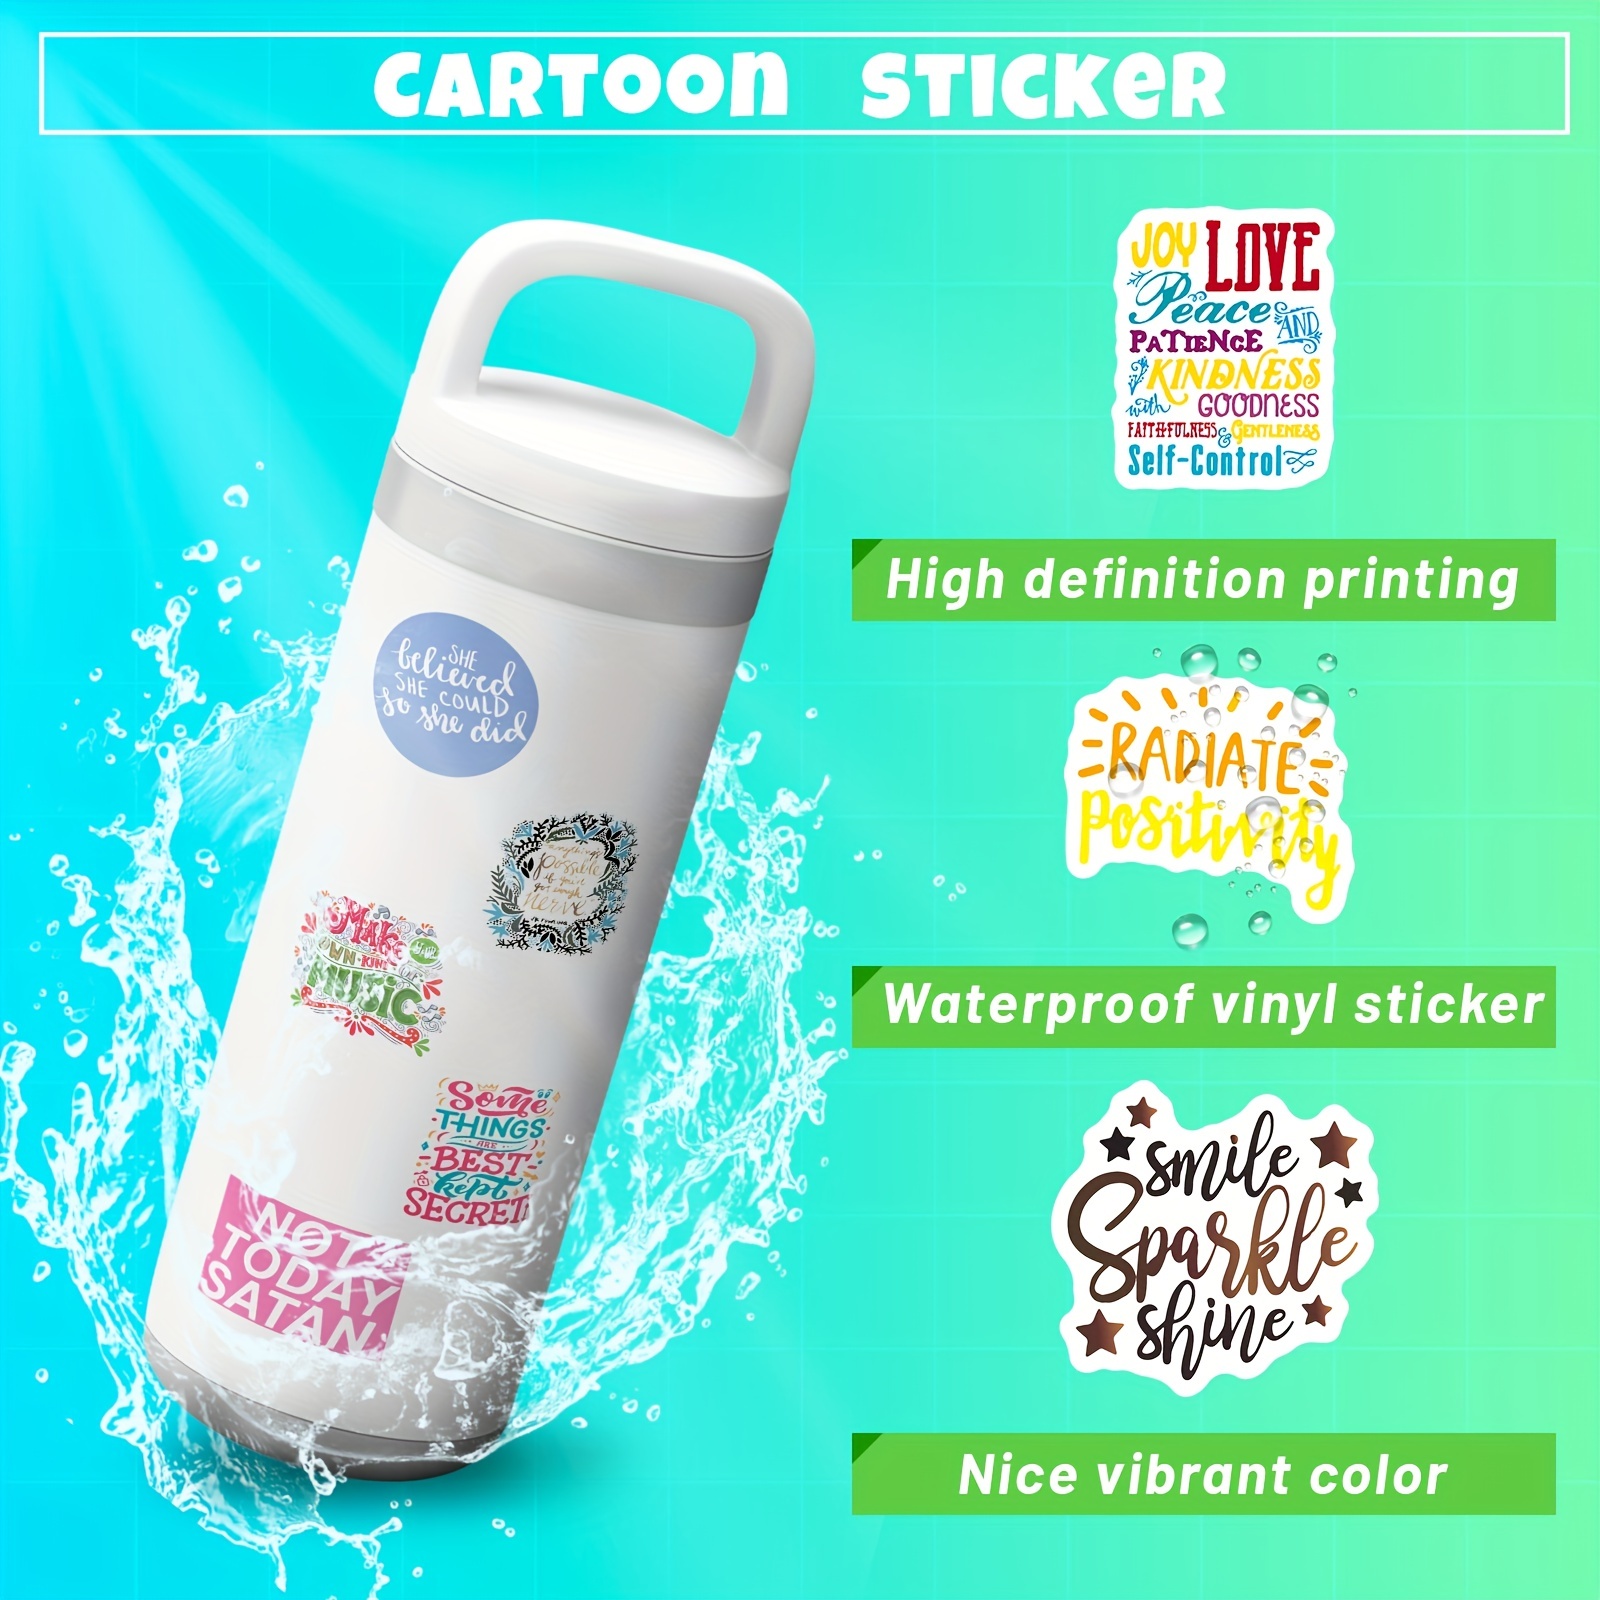 300 PCS Motivational Encouraging Stickers,Inspirational Stickers for Water  Bottles Skateboard Scrapbooking,Inspirational Stickers for Adults Teens